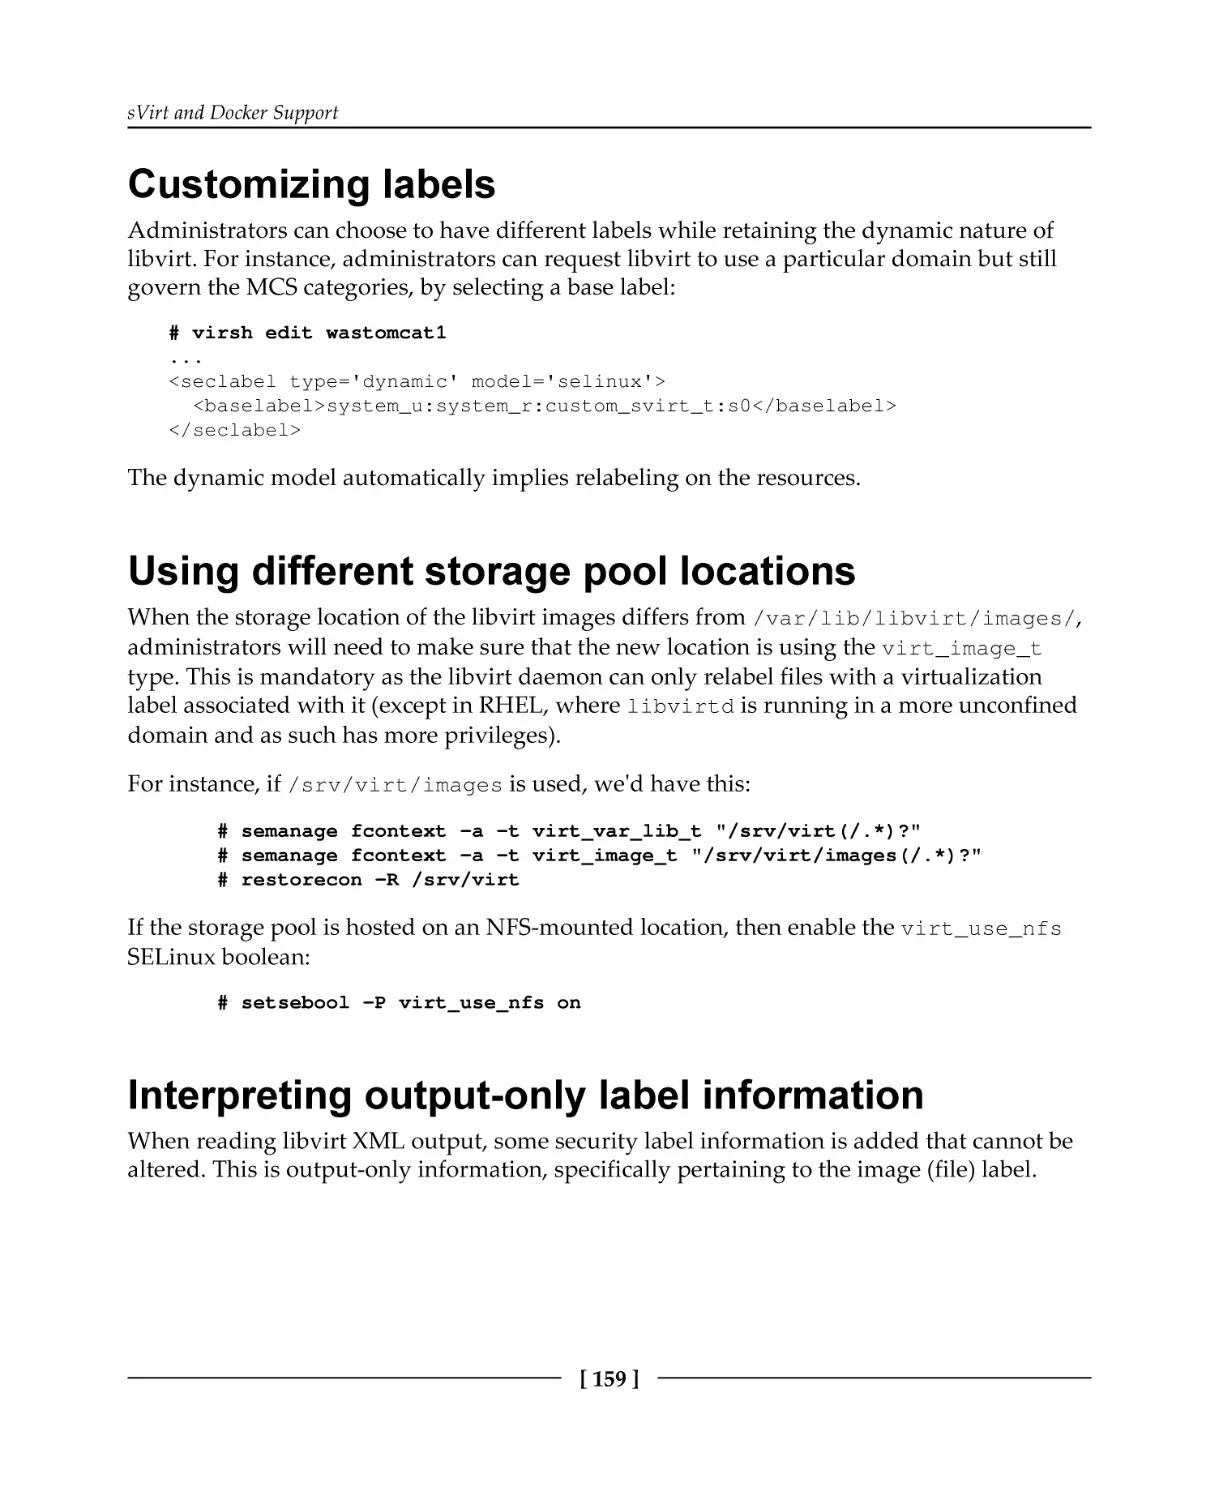 Customizing labels
Using different storage pool locations
Interpreting output-only label information